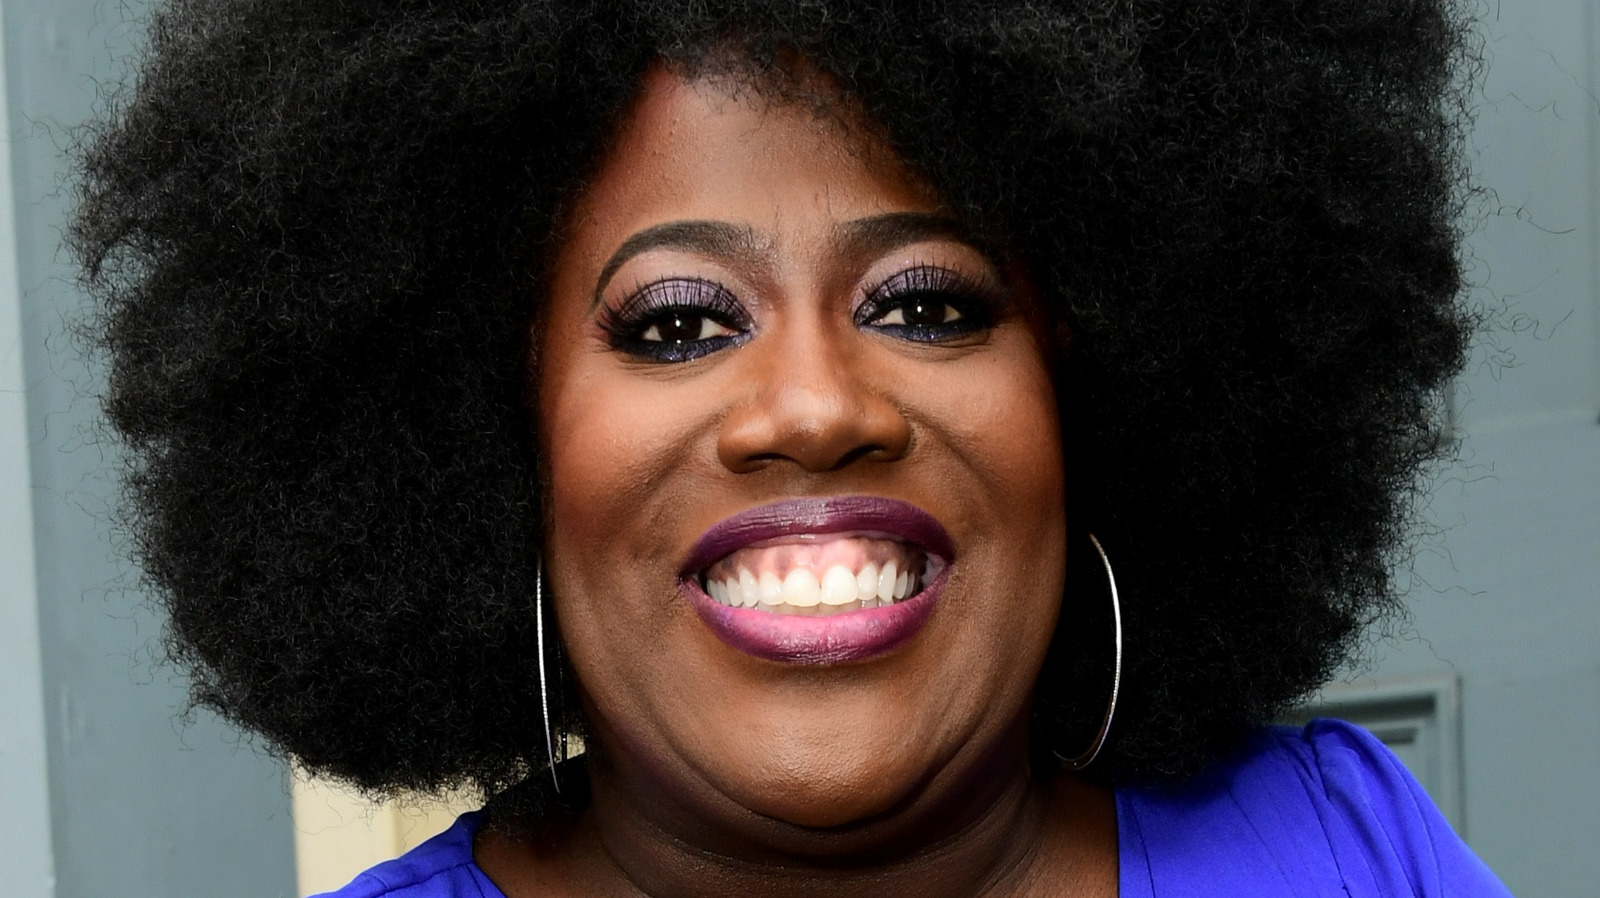 Sheryl Underwood's Net Worth: How Much Does The Talk Co-Host Make?